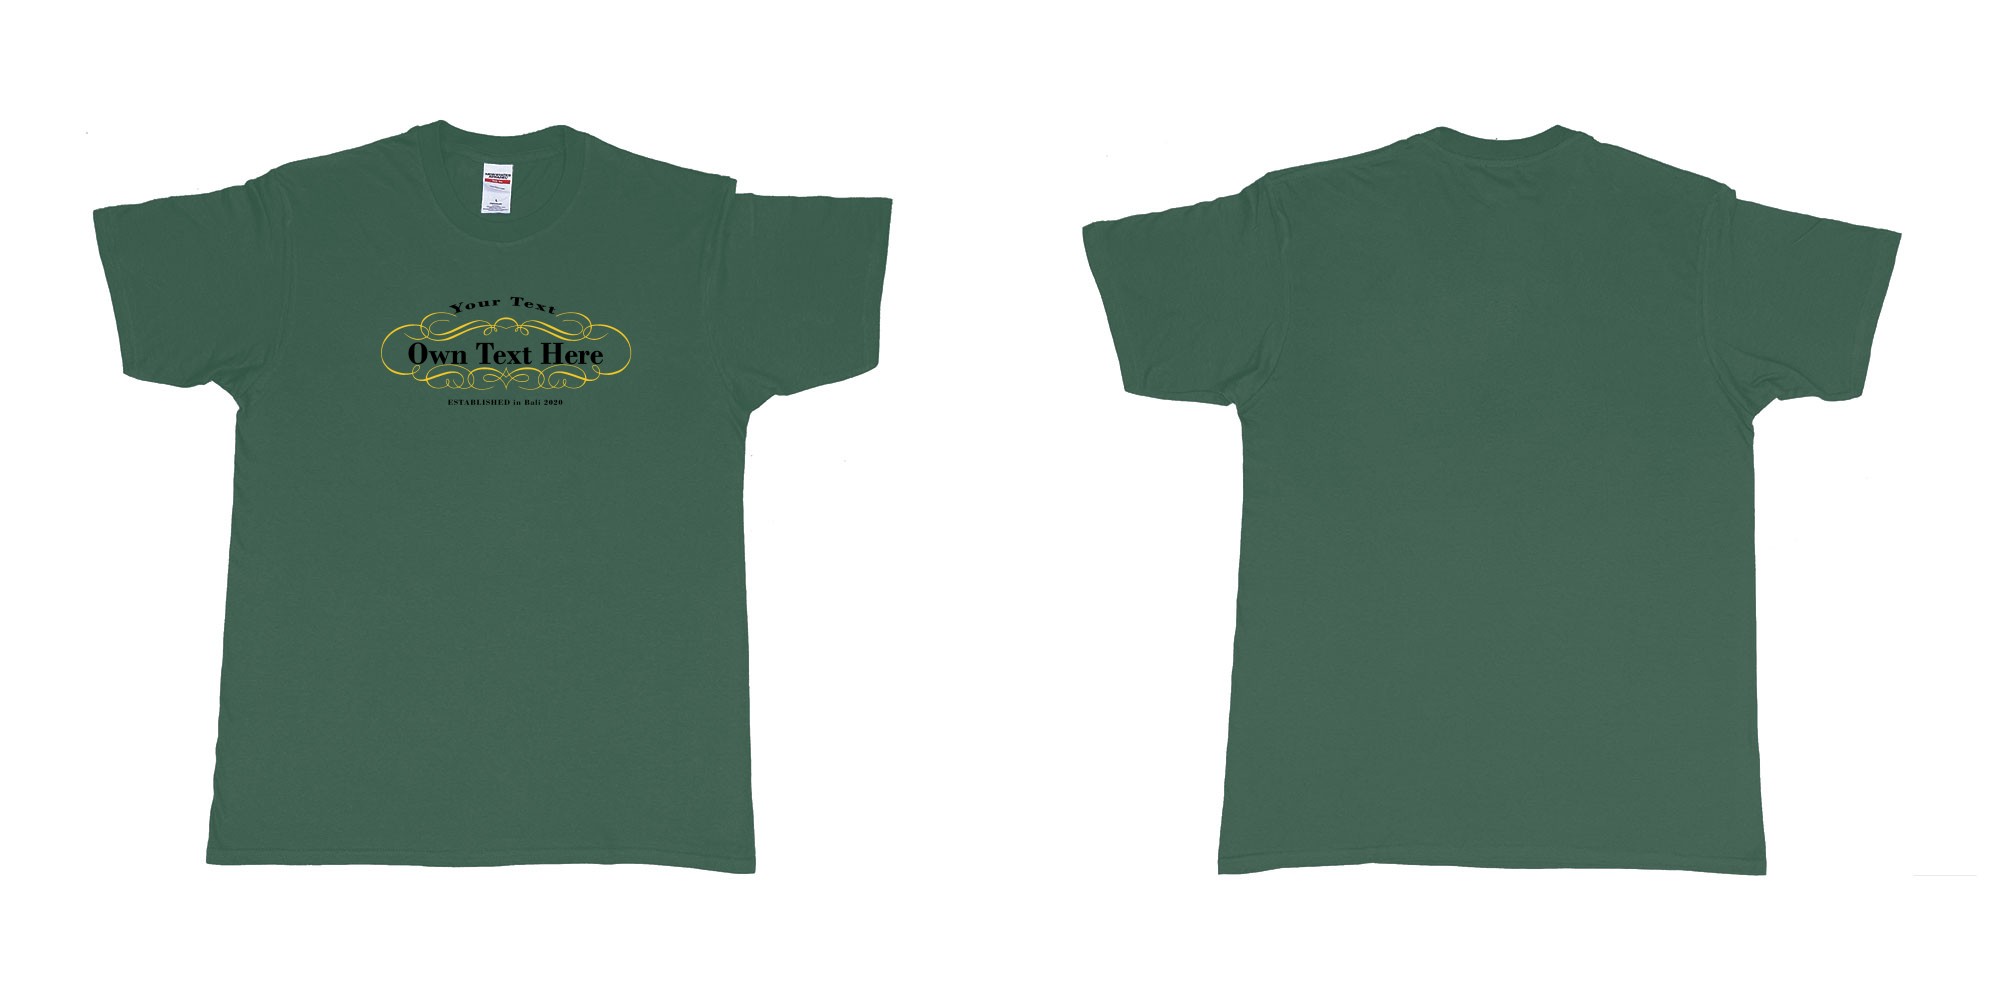 Custom tshirt design Laurent perrier in fabric color forest-green choice your own text made in Bali by The Pirate Way